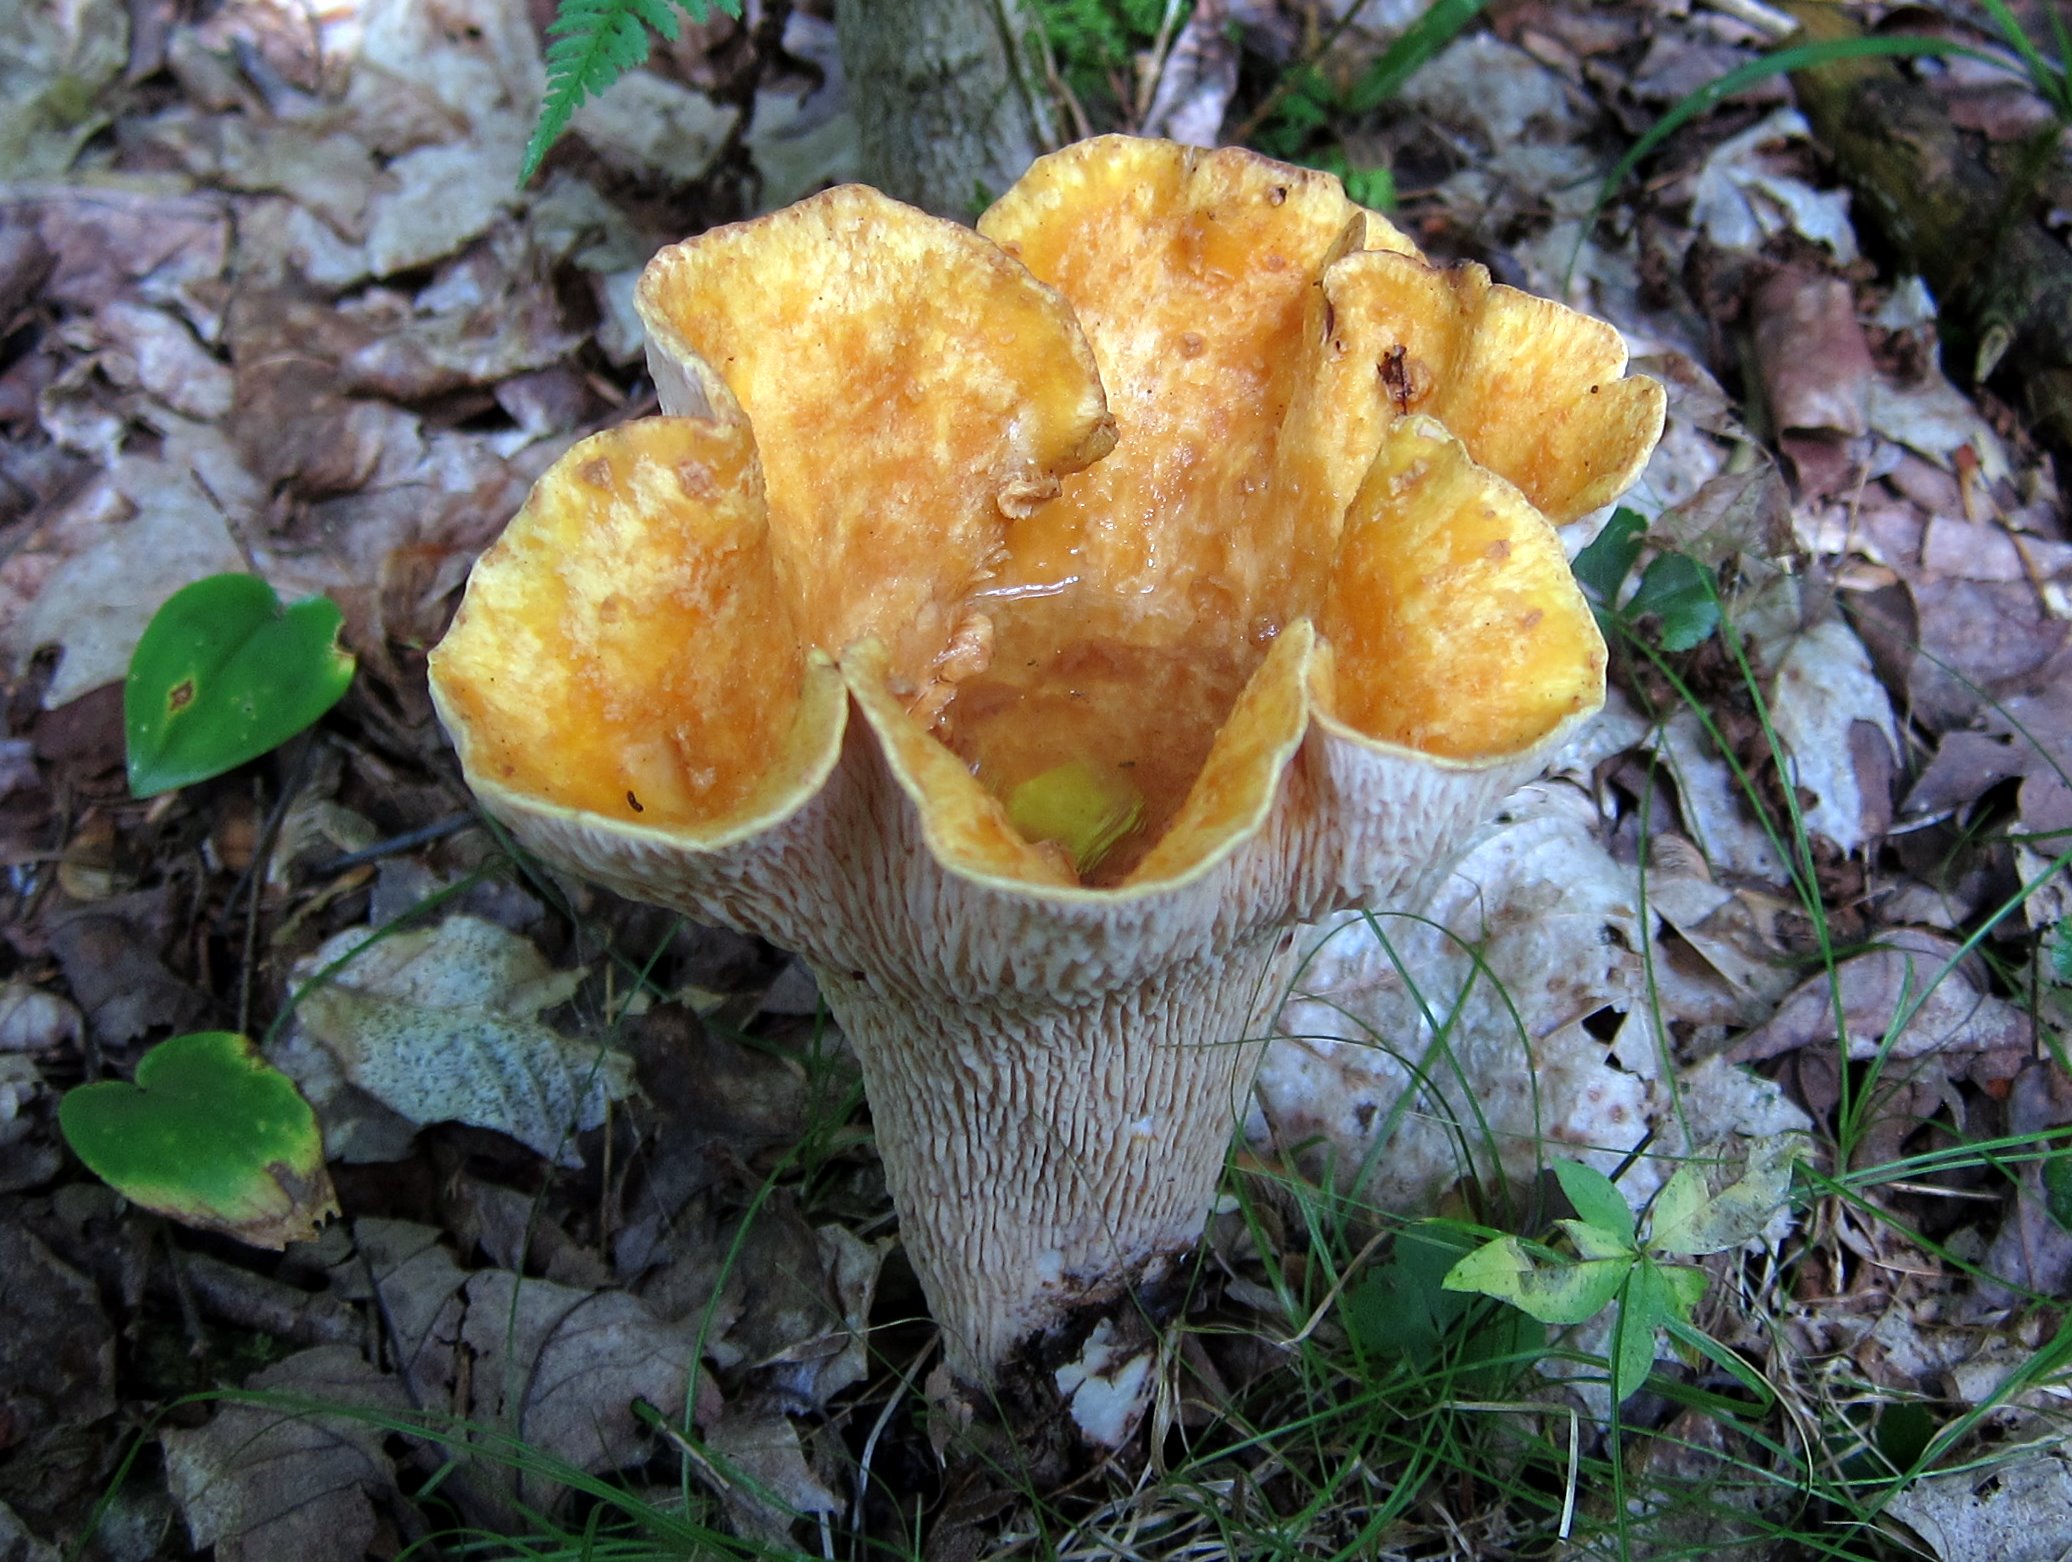 a yellow fungus sits among some leaves